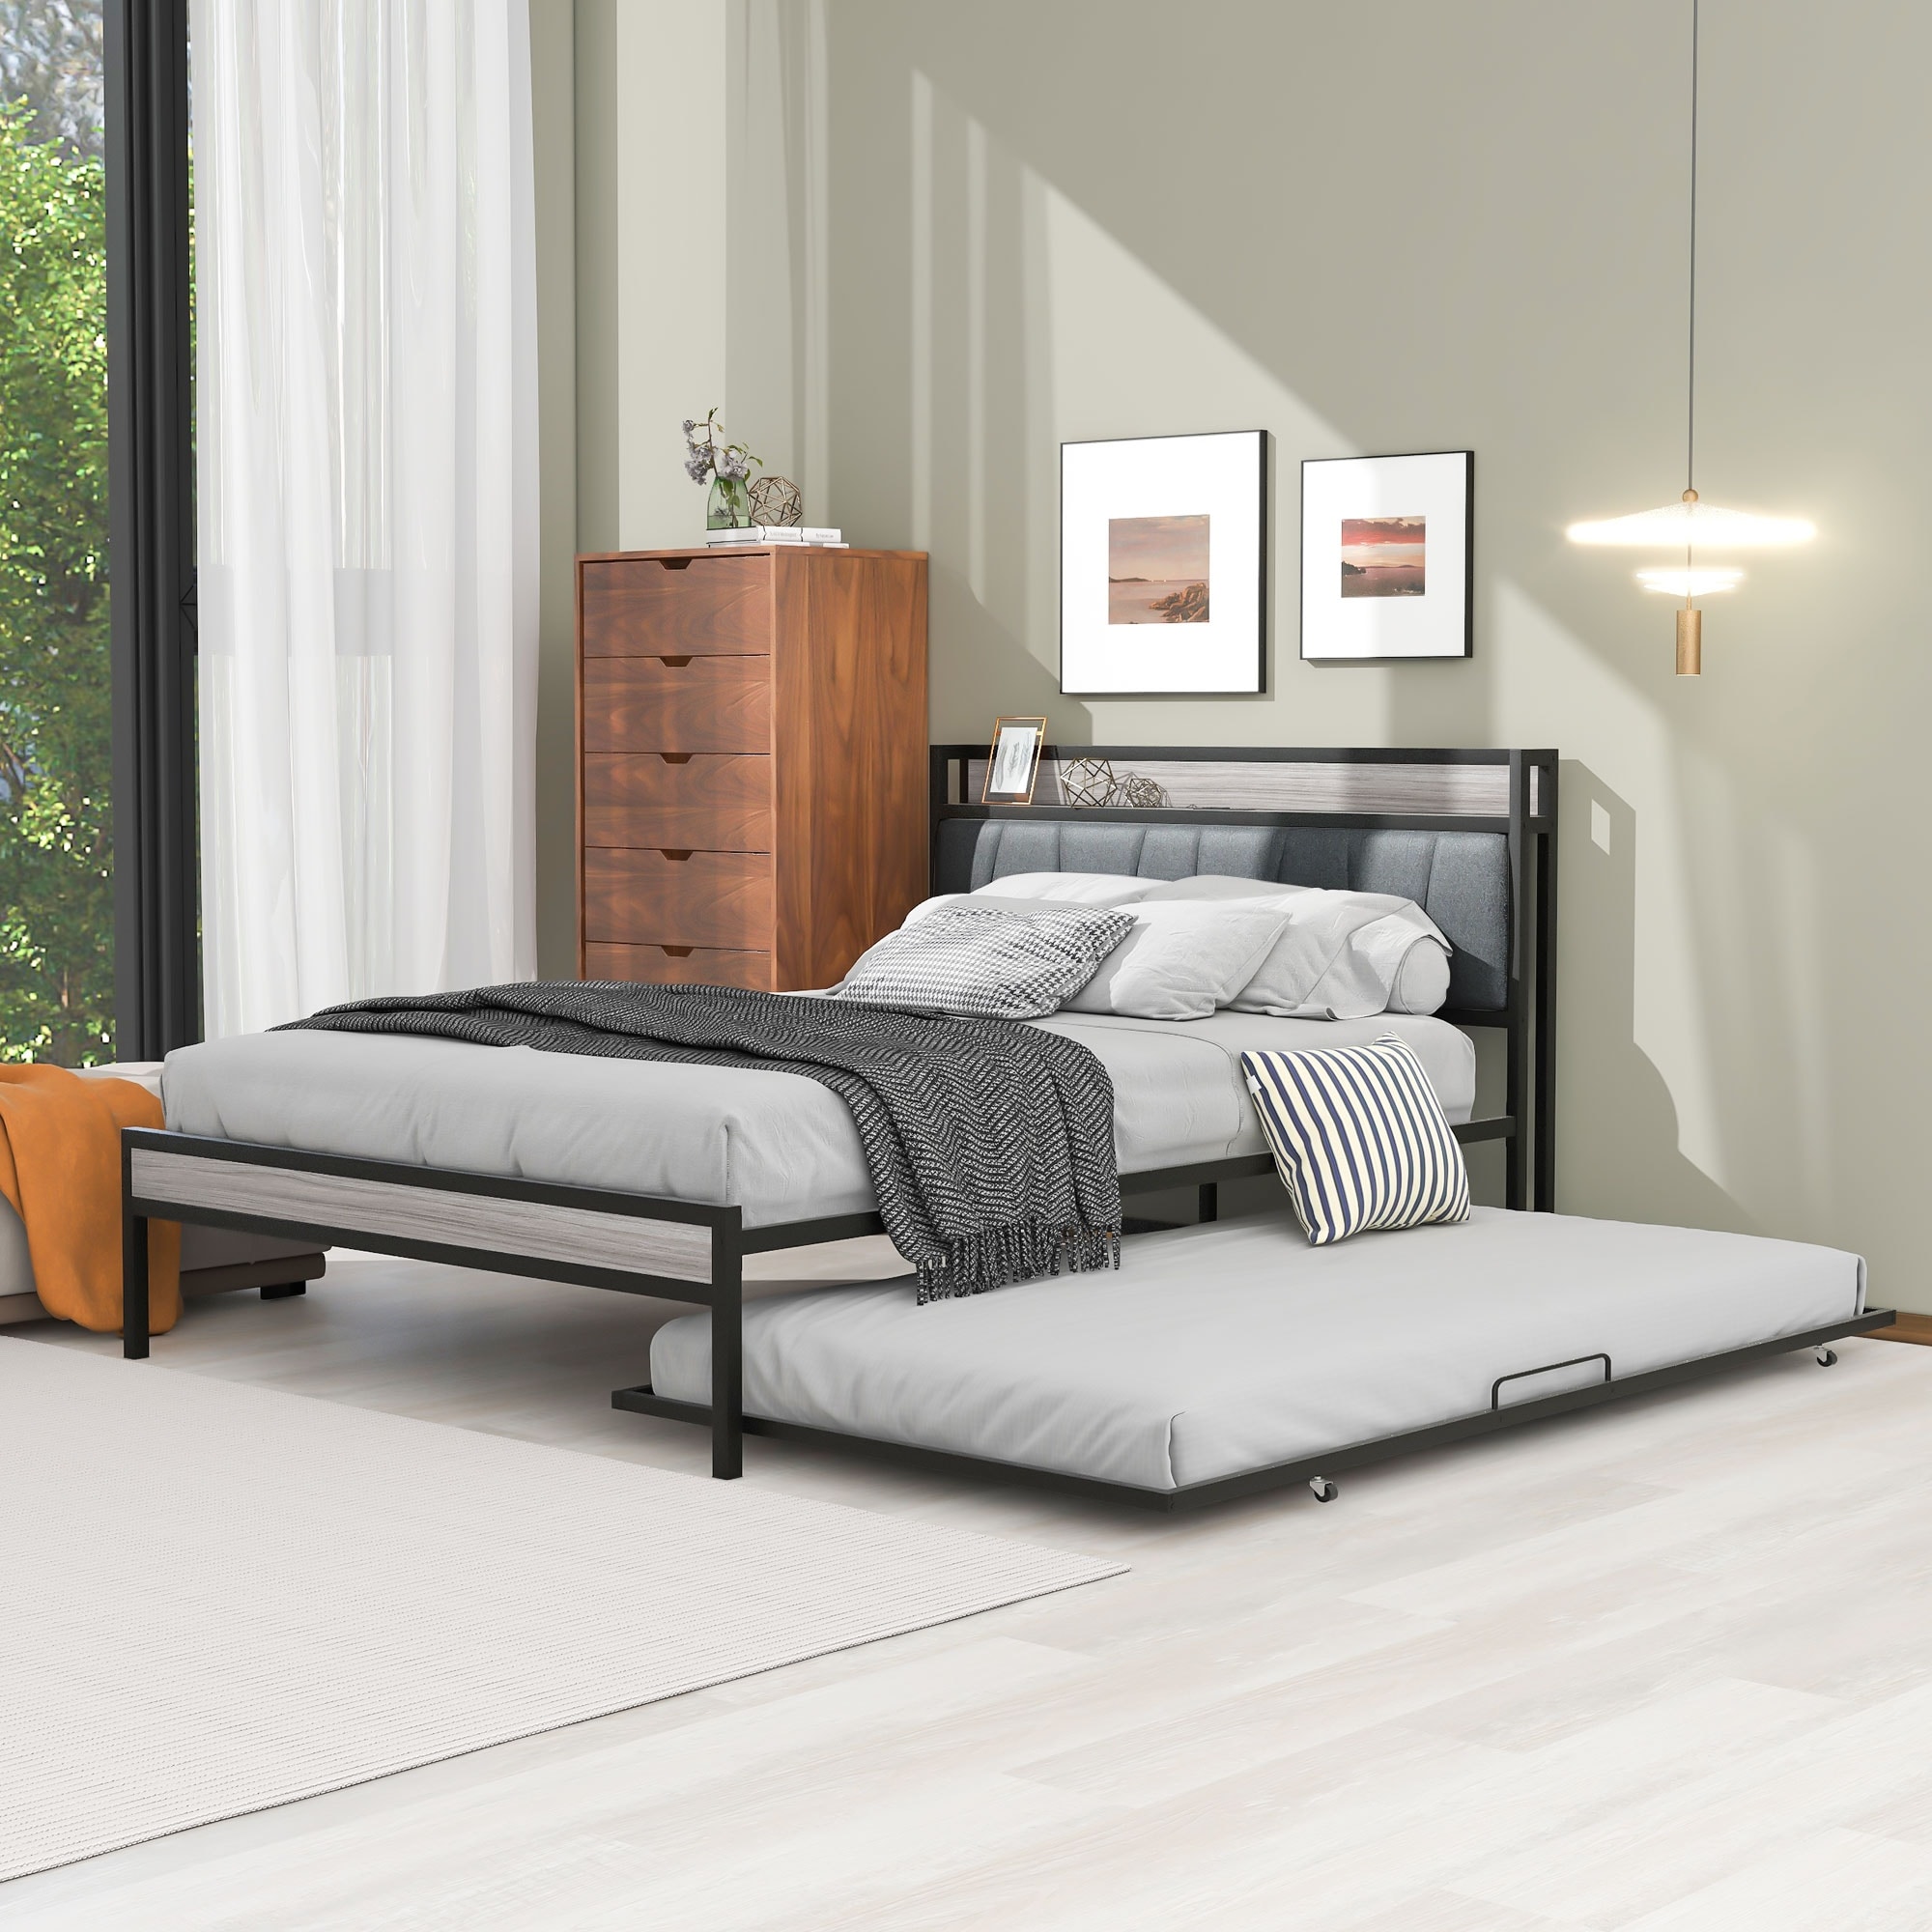 Metal Platform Bed Frame With Twin Trundle  Upholstered Headboard  Sockets  Usb Ports and Wood Slats Support  No Box Spring Needed